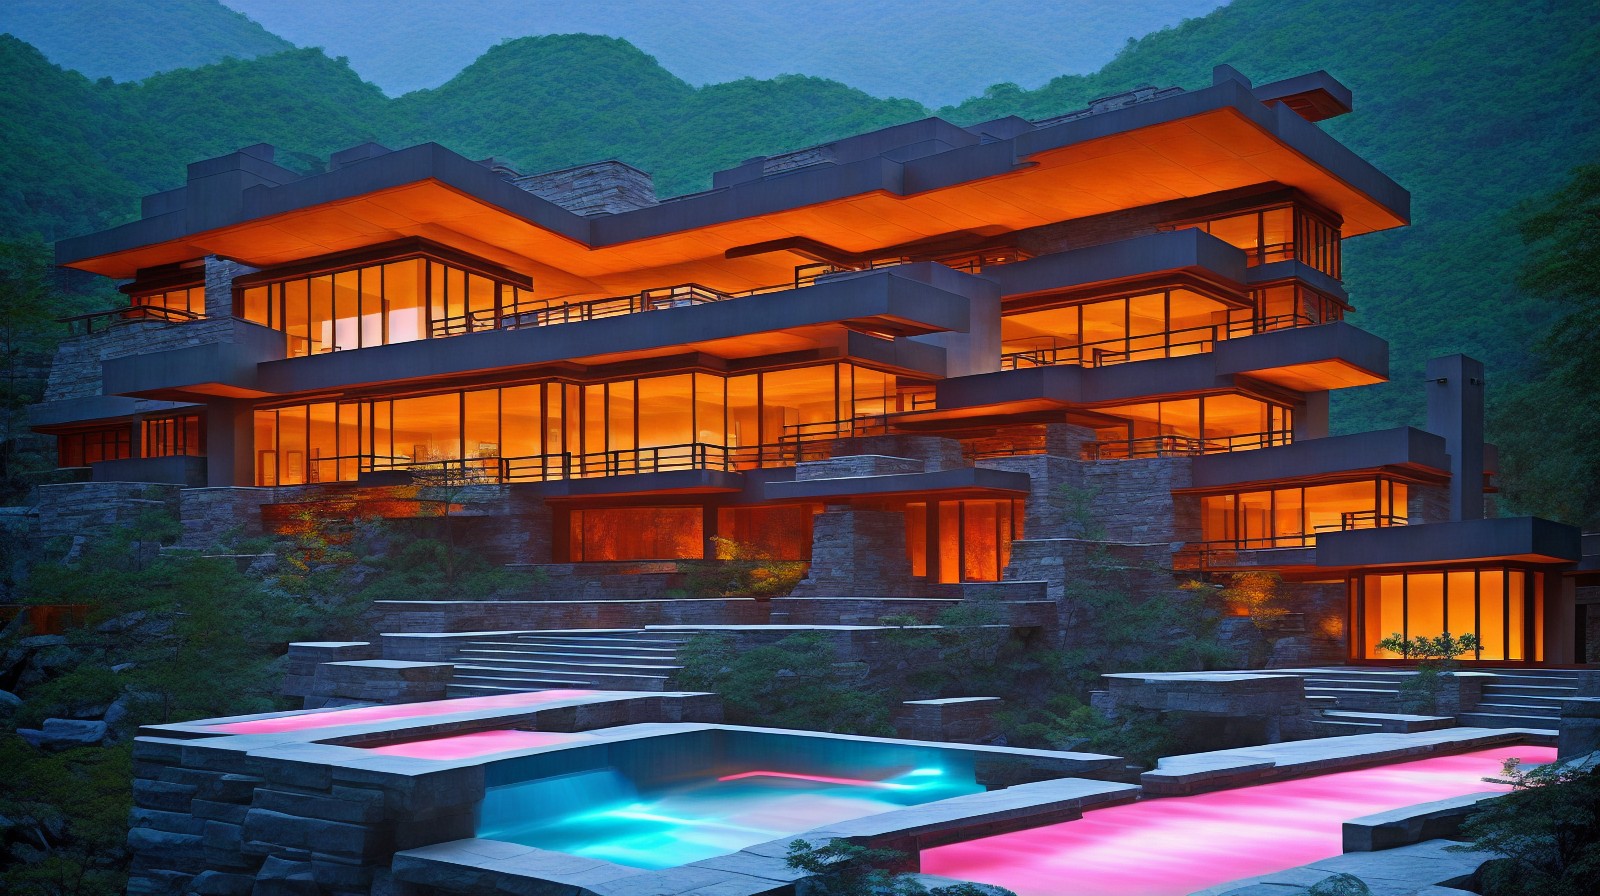 Fallingwater on the Hill, modeled on Wright's style